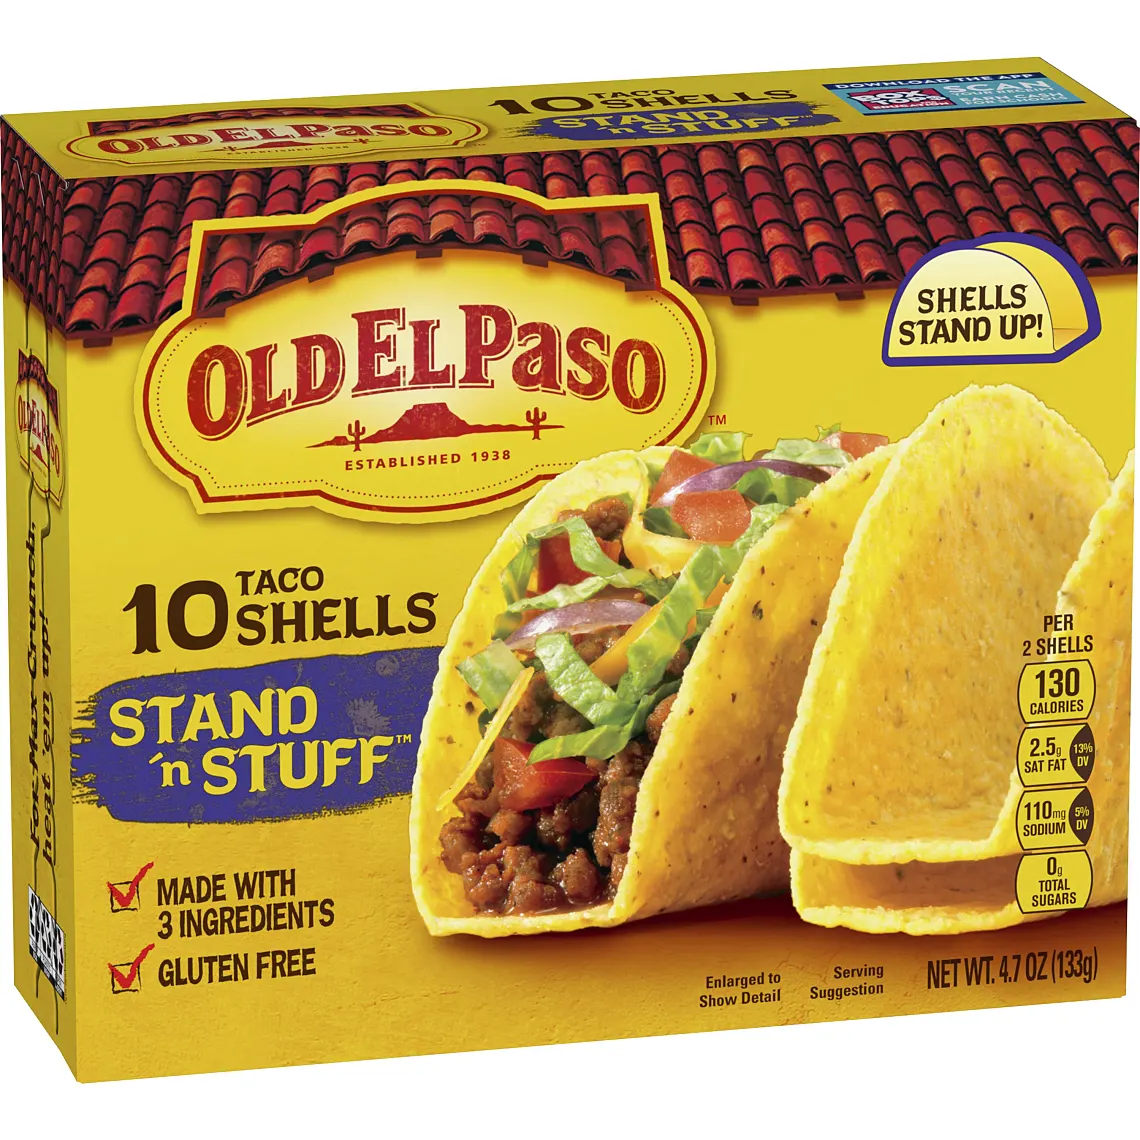 Old El Paso Taco Shells Stand 'N Stuff 10 count